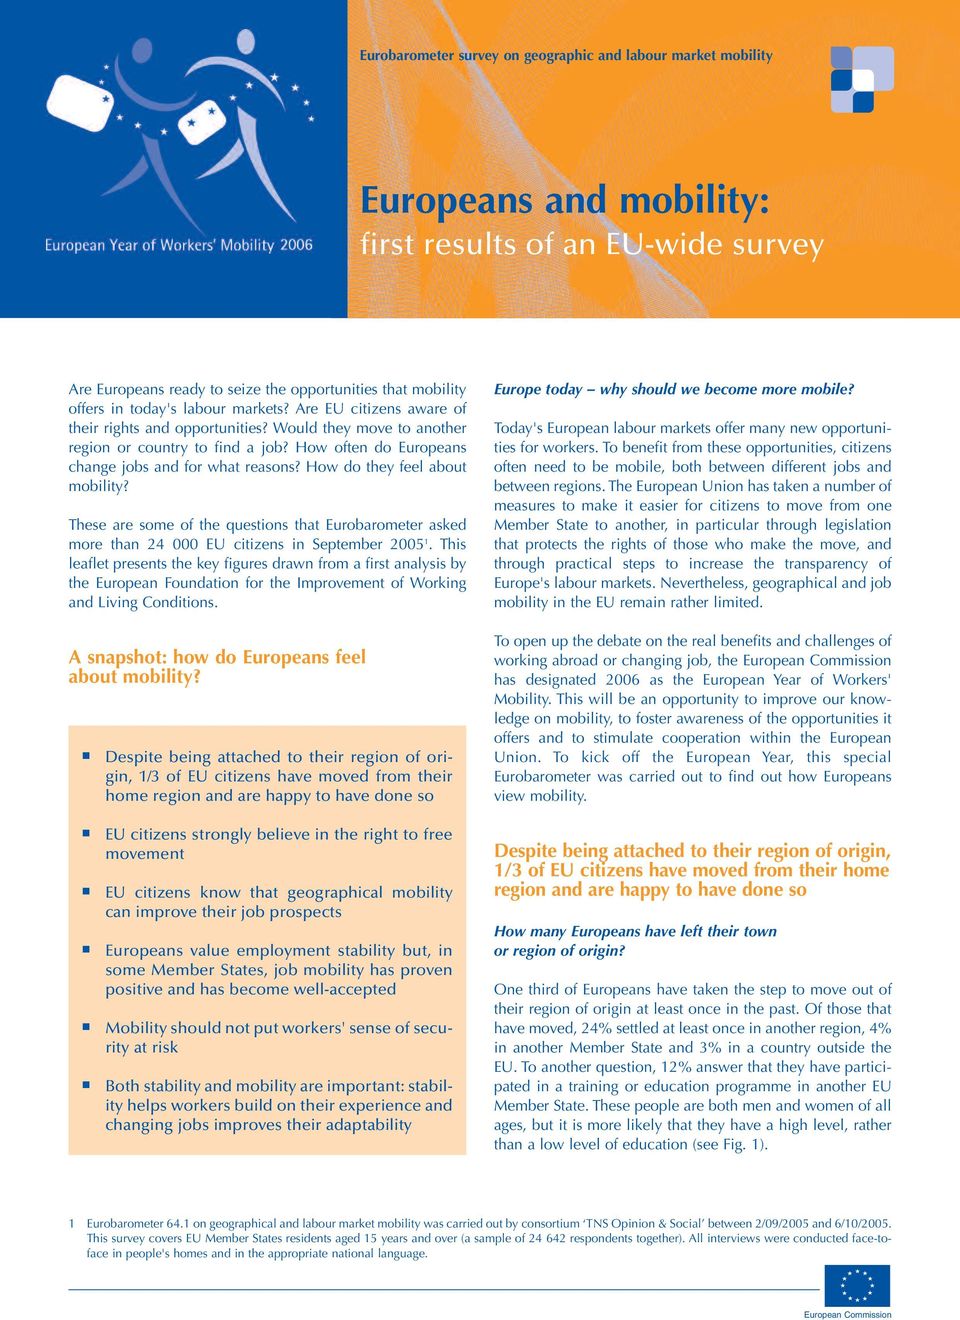 How do they feel about mobility? These are some of the questions that Eurobarometer asked more than 24 000 EU citizens in September 2005 1.